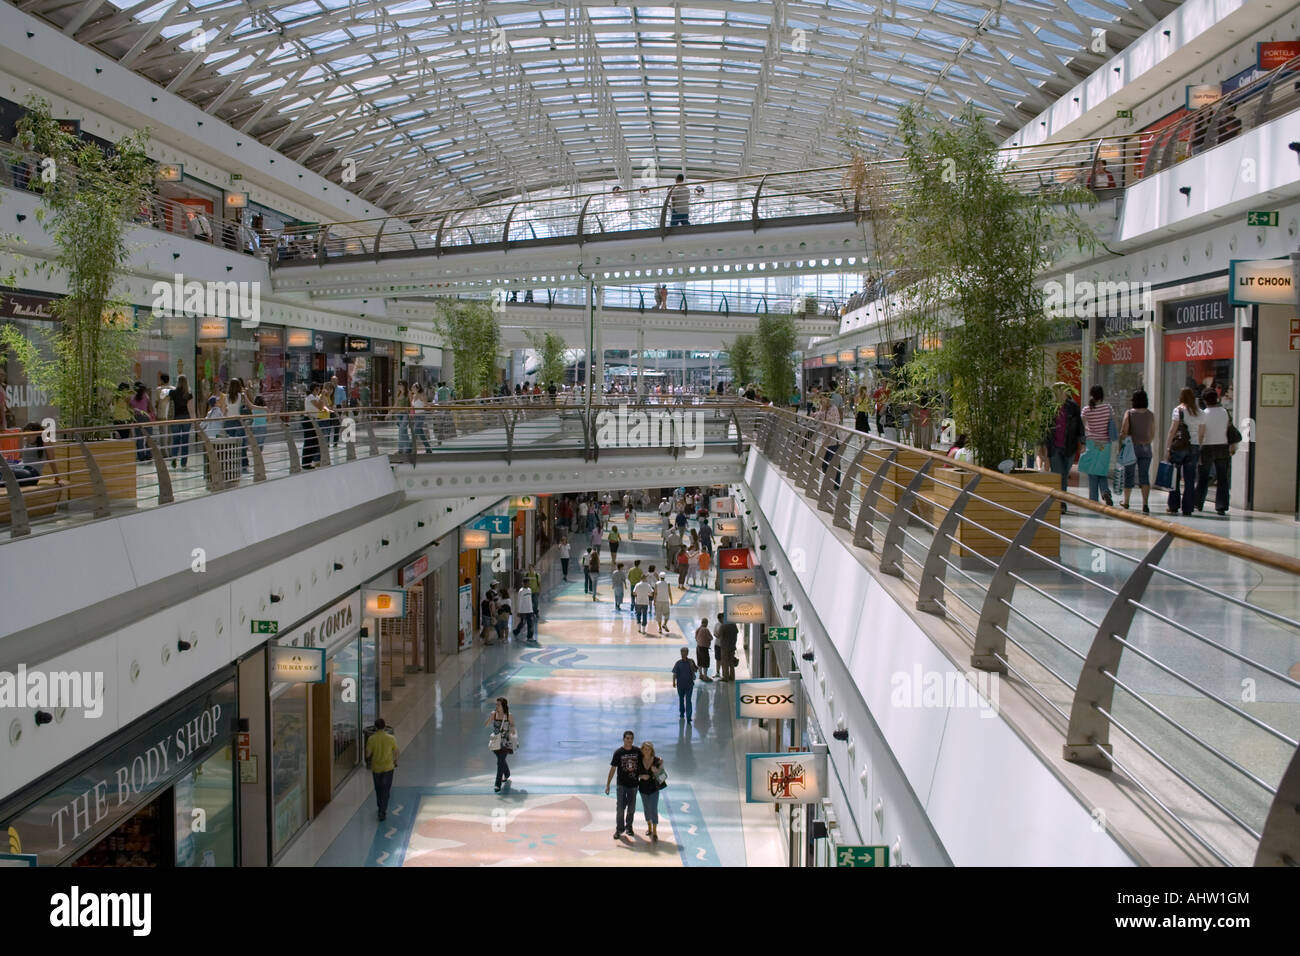 Shopping centre in Lisbon, Portugal Stock Photo